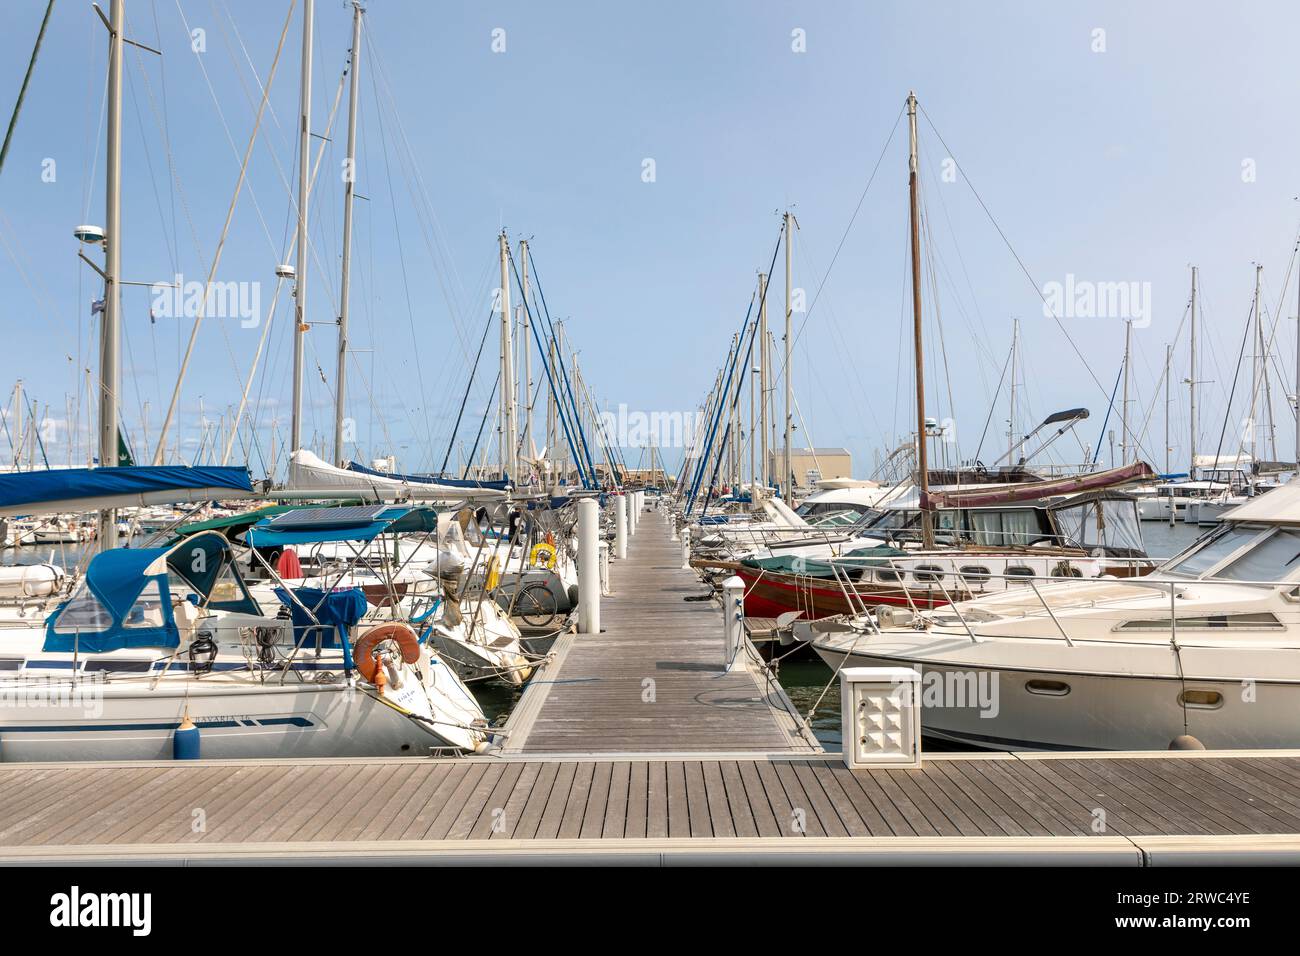 Yachts berthed in the marina at Canet-en-Roussillon, South of France Stock Photo